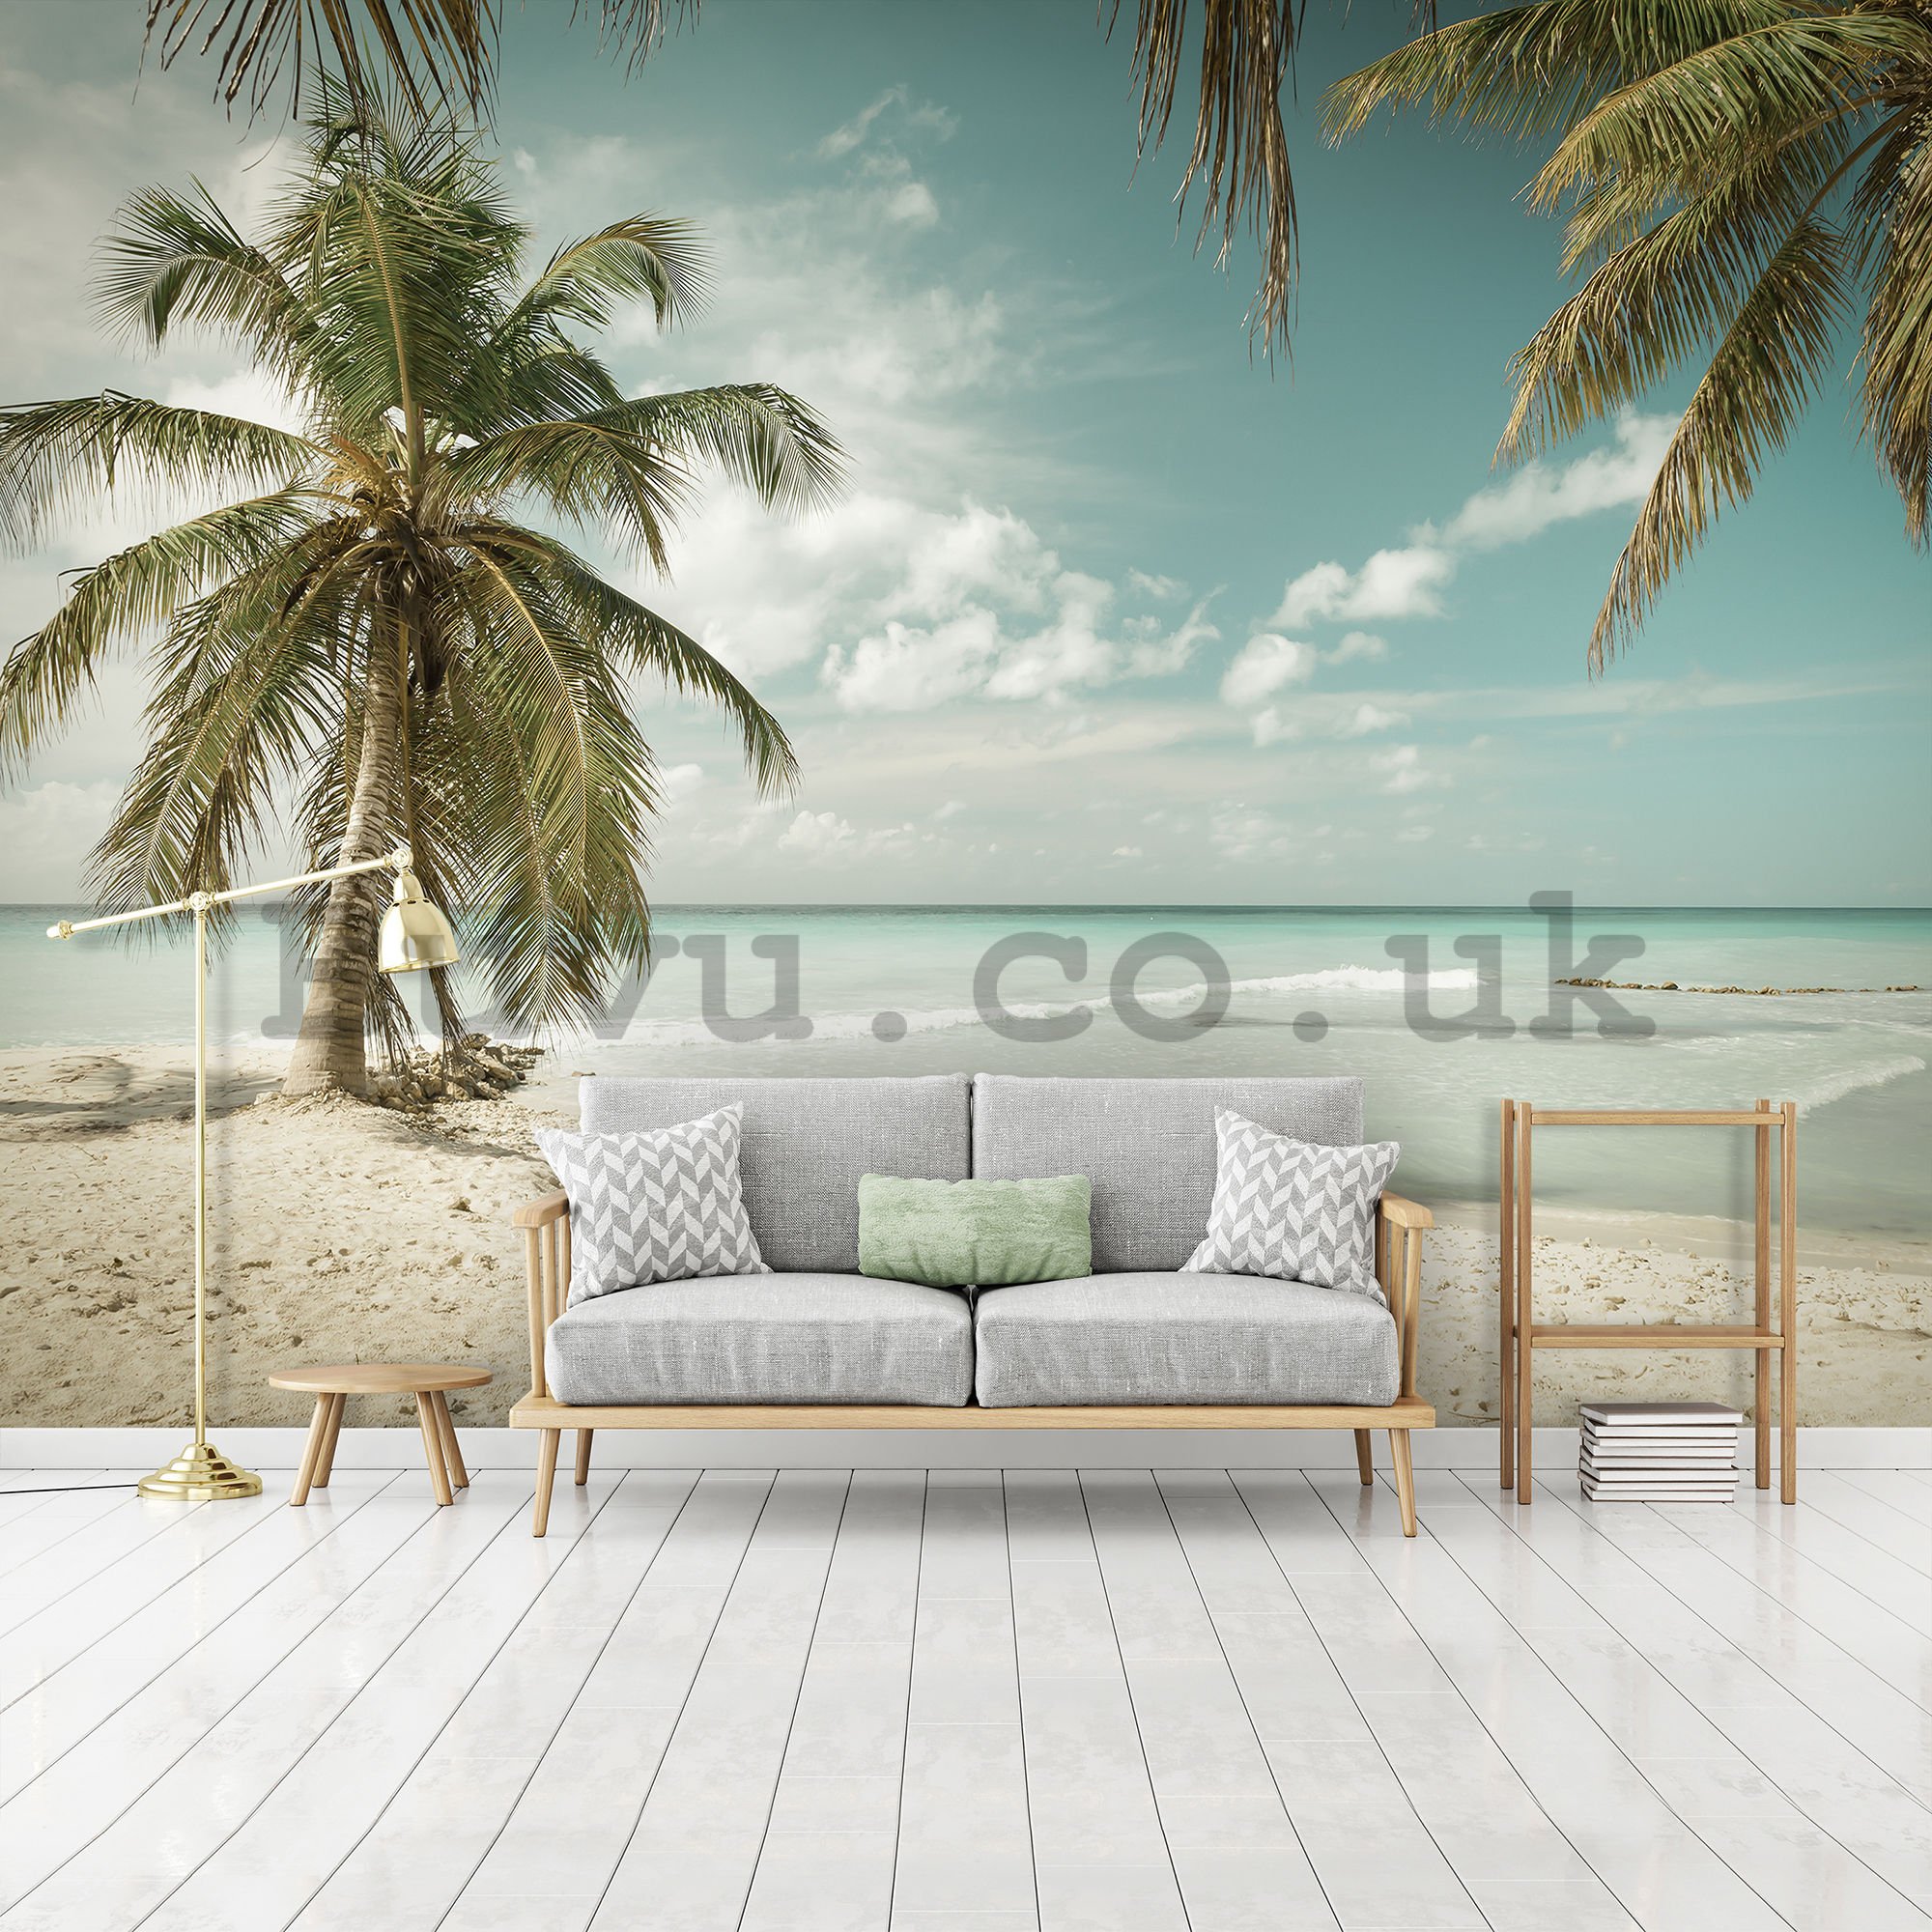 Wall mural: Palm trees over the sea - 254x368 cm